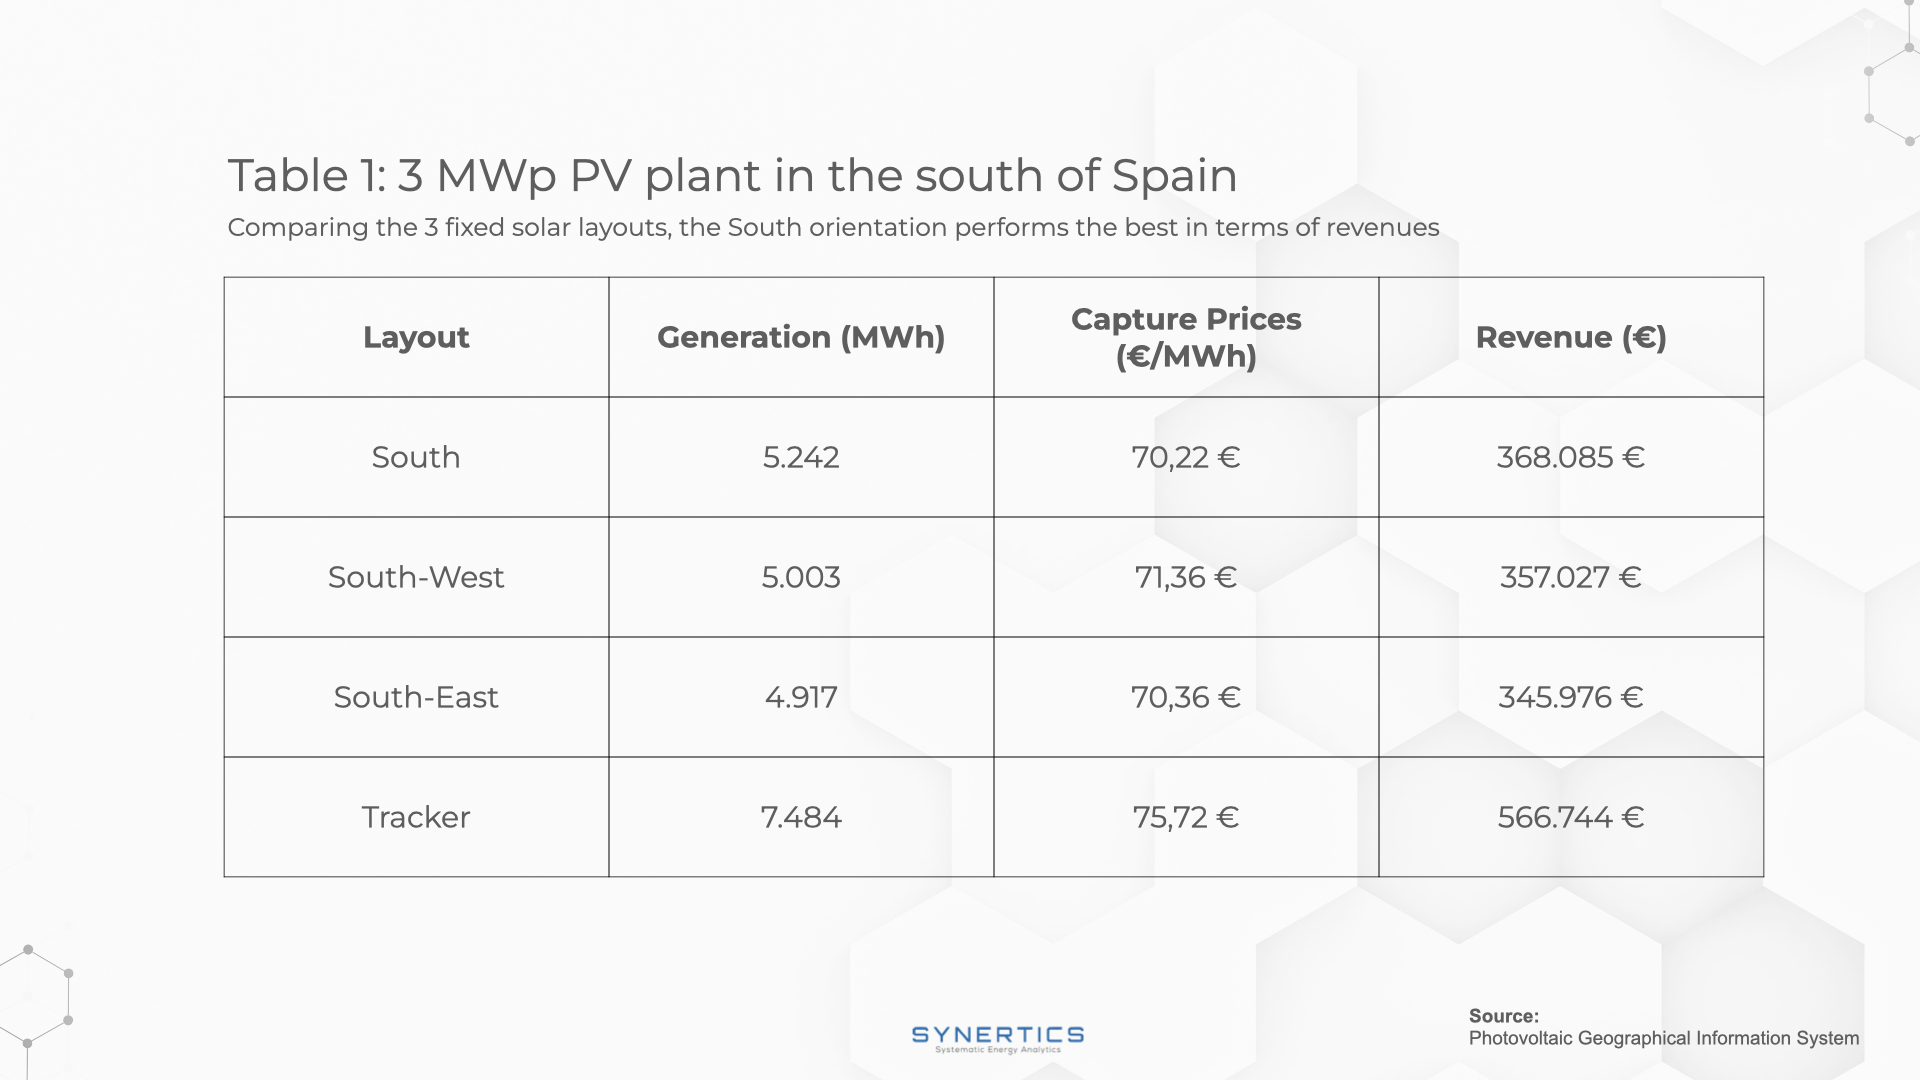 Revenues, Capture prices and generation of a 3MWp PV plant in the south of Spain